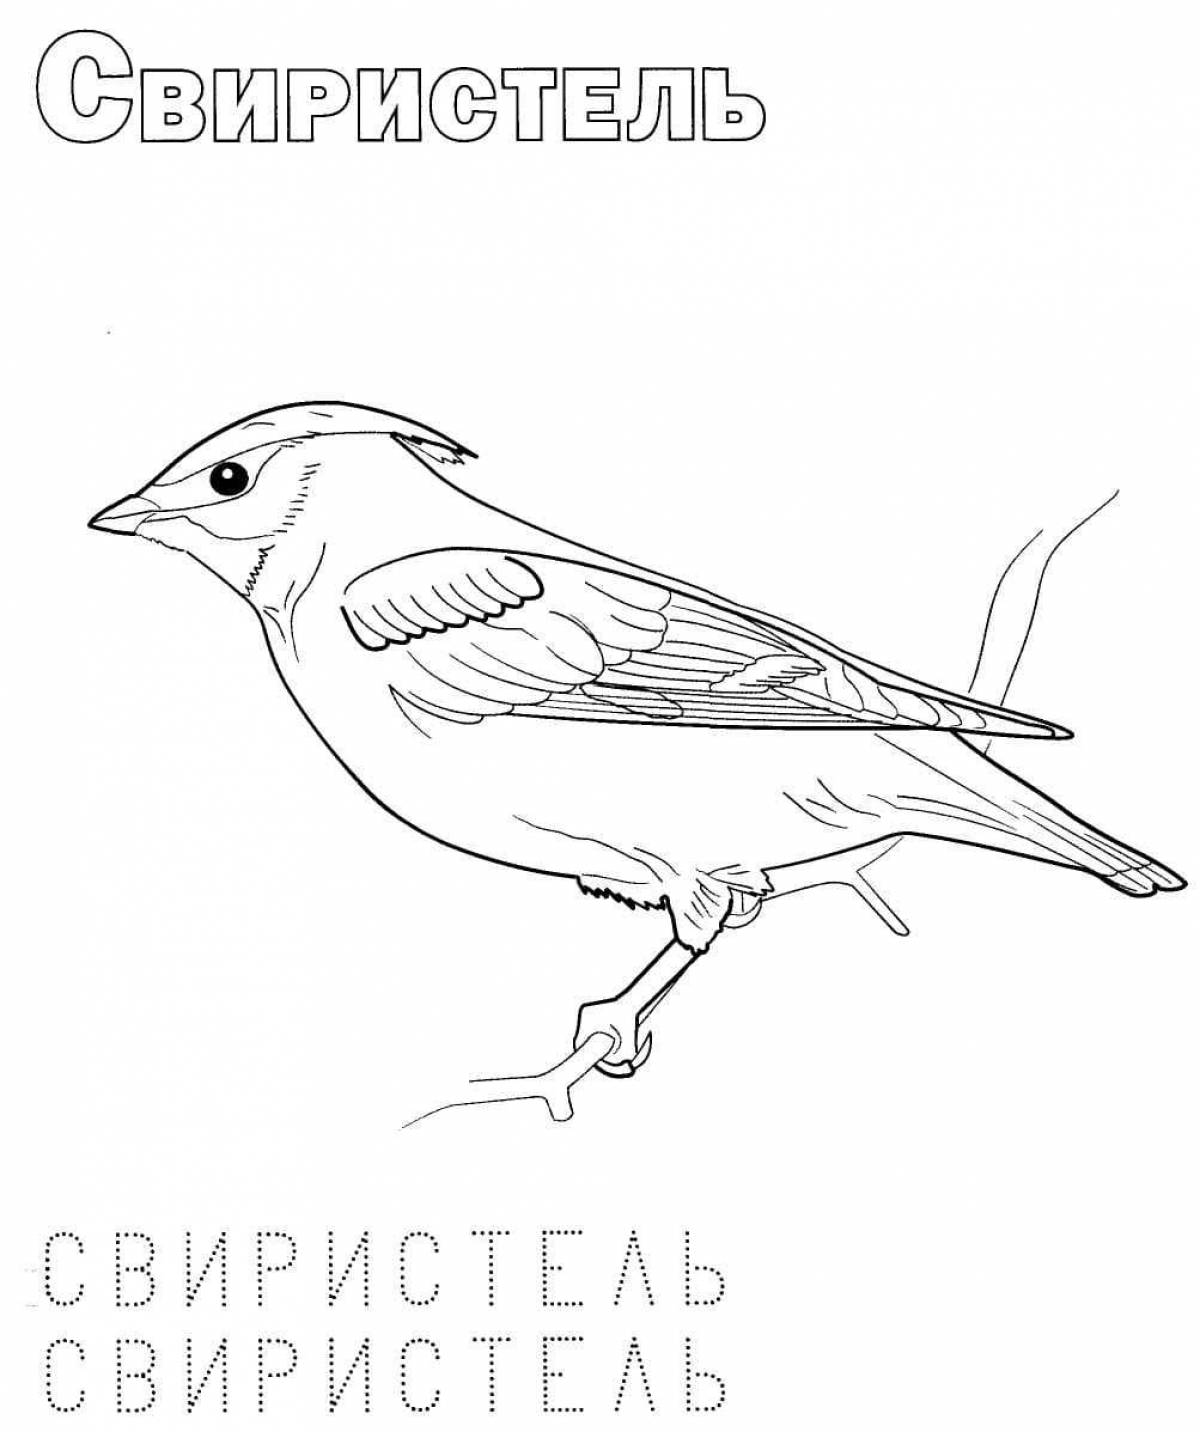 Coloring pages of wintering birds with crazy colors for 6-7 year olds